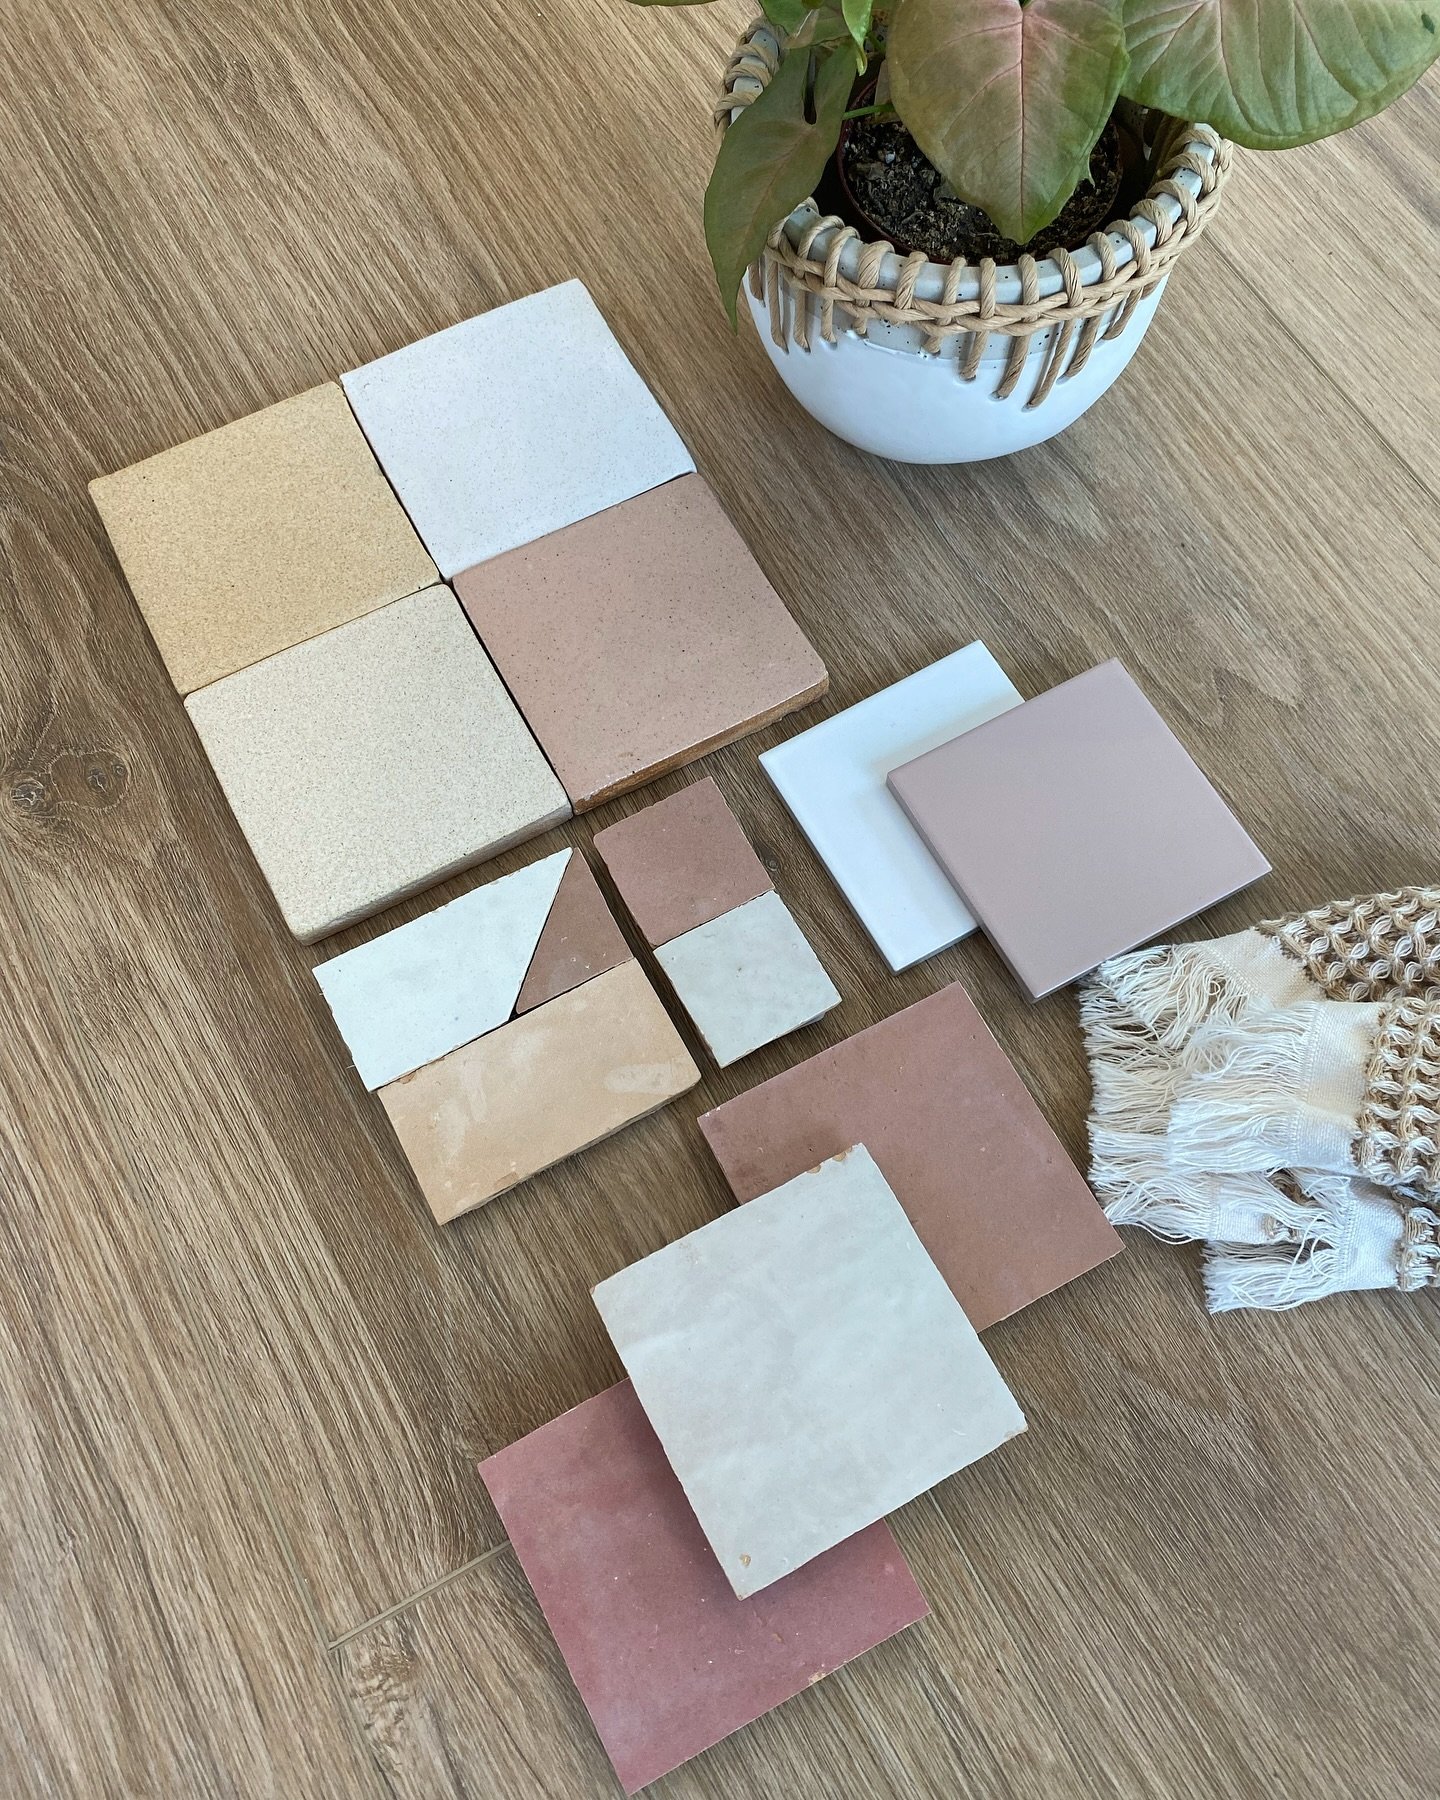 FLAT LAY FRIDAY // Playing around with different tiles for a fun space. Nothing set just yet but it&rsquo;s sure getting exciting with these colors + textures!
.
.
.
#StayInteriors #CurrentDesignSituation #FlatLayInspiration #FlatLay #PinkTile #Bathr